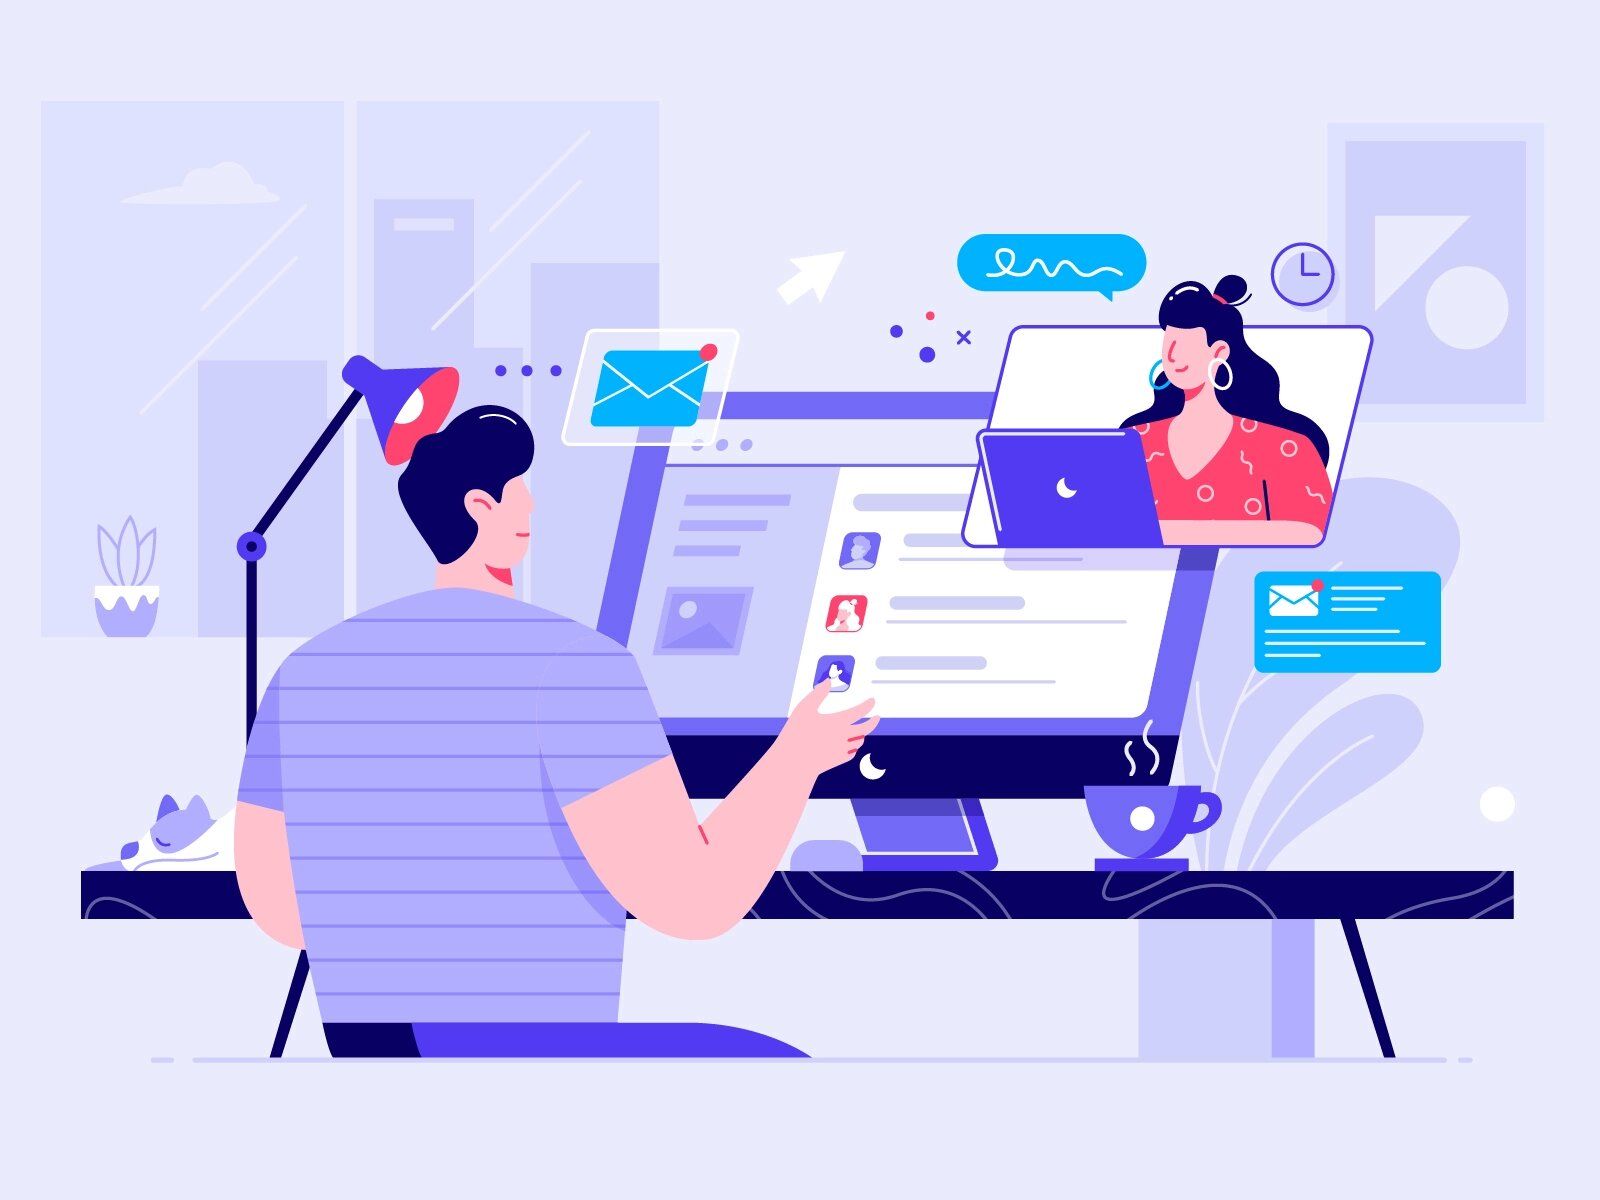 Managing remote teams will get easier as your employees get to know their colleagues better (*image by [Unini](https://dribbble.com/Unini){ rel="nofollow" target="_blank" .default-md}*)